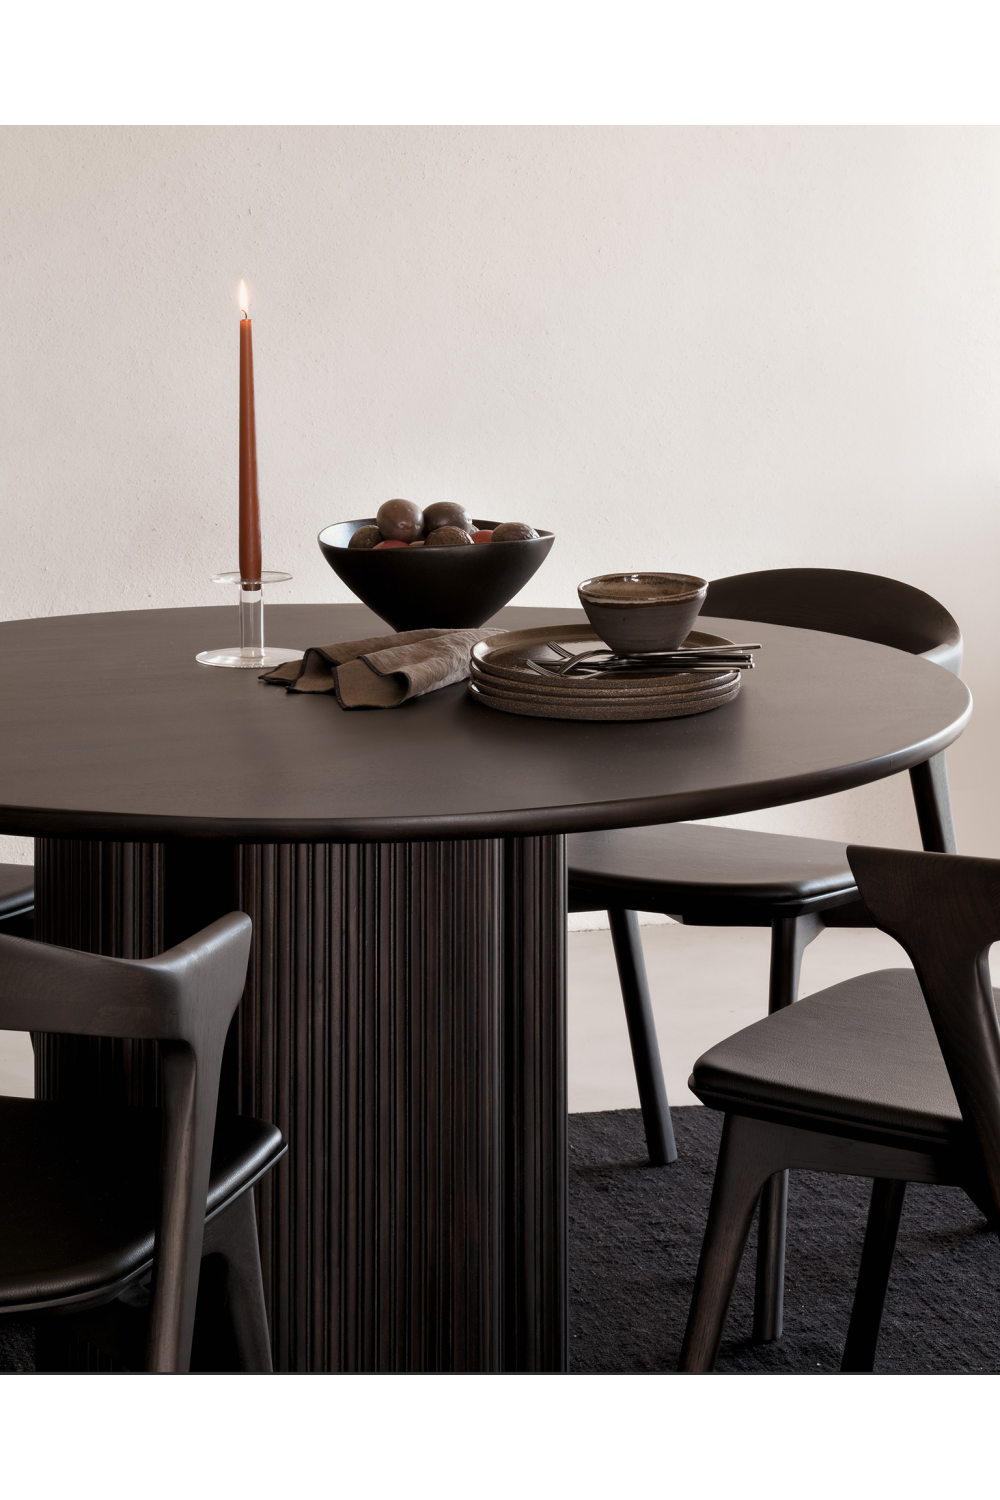 Brown Mahogany Dining Table | Ethnicraft Roller Max | Oroa.com